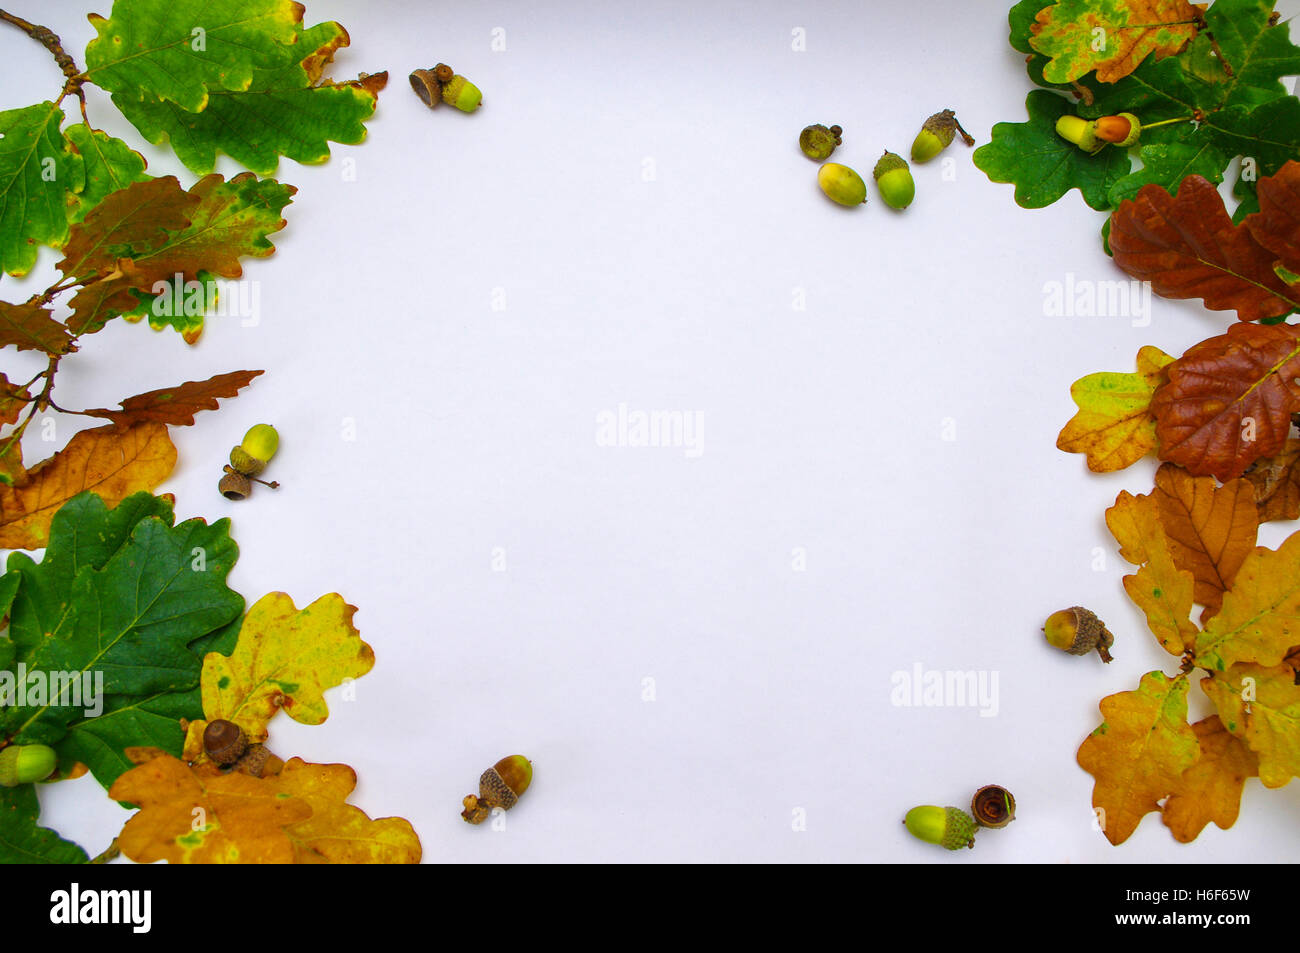 Autumn border with oak leaves and acorns. Stock Photo